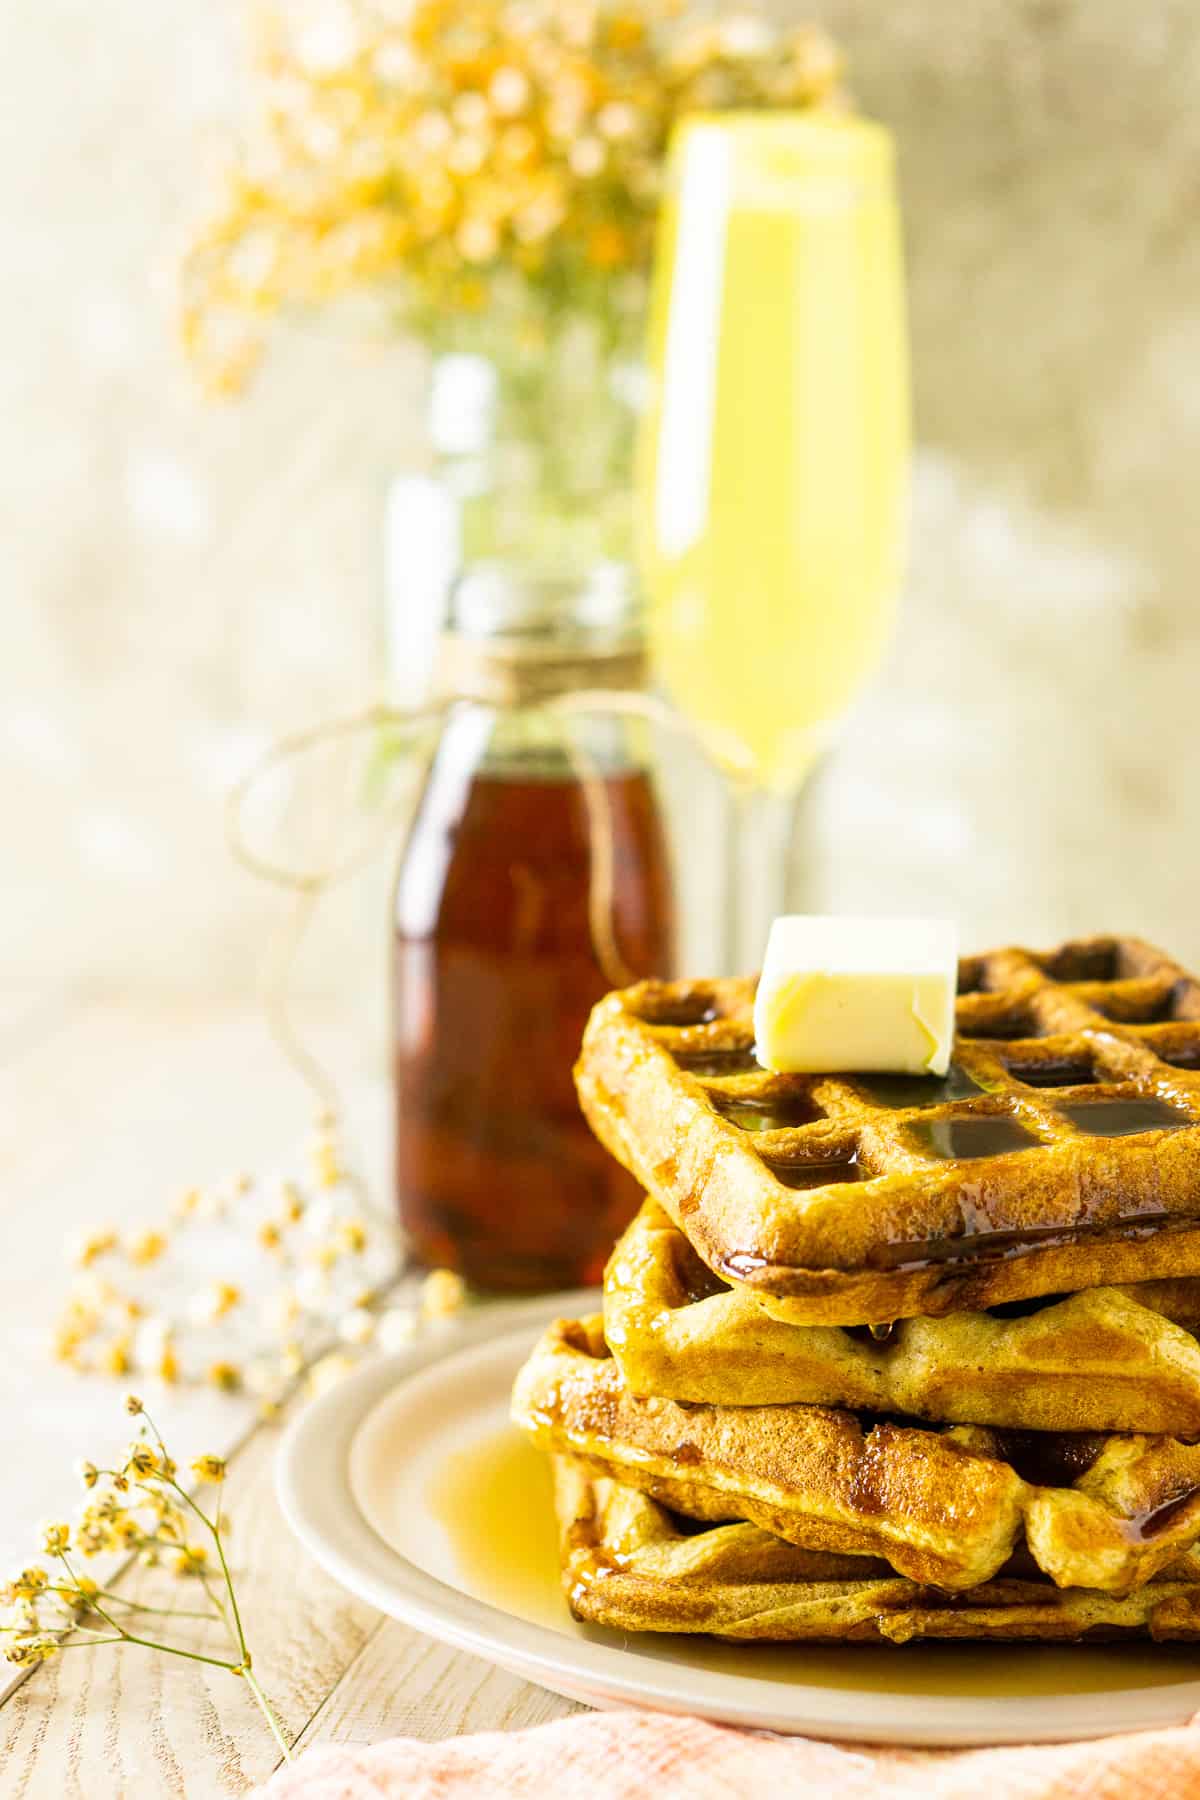 A side view of the buttermilk waffles with flowers and a mimosa.